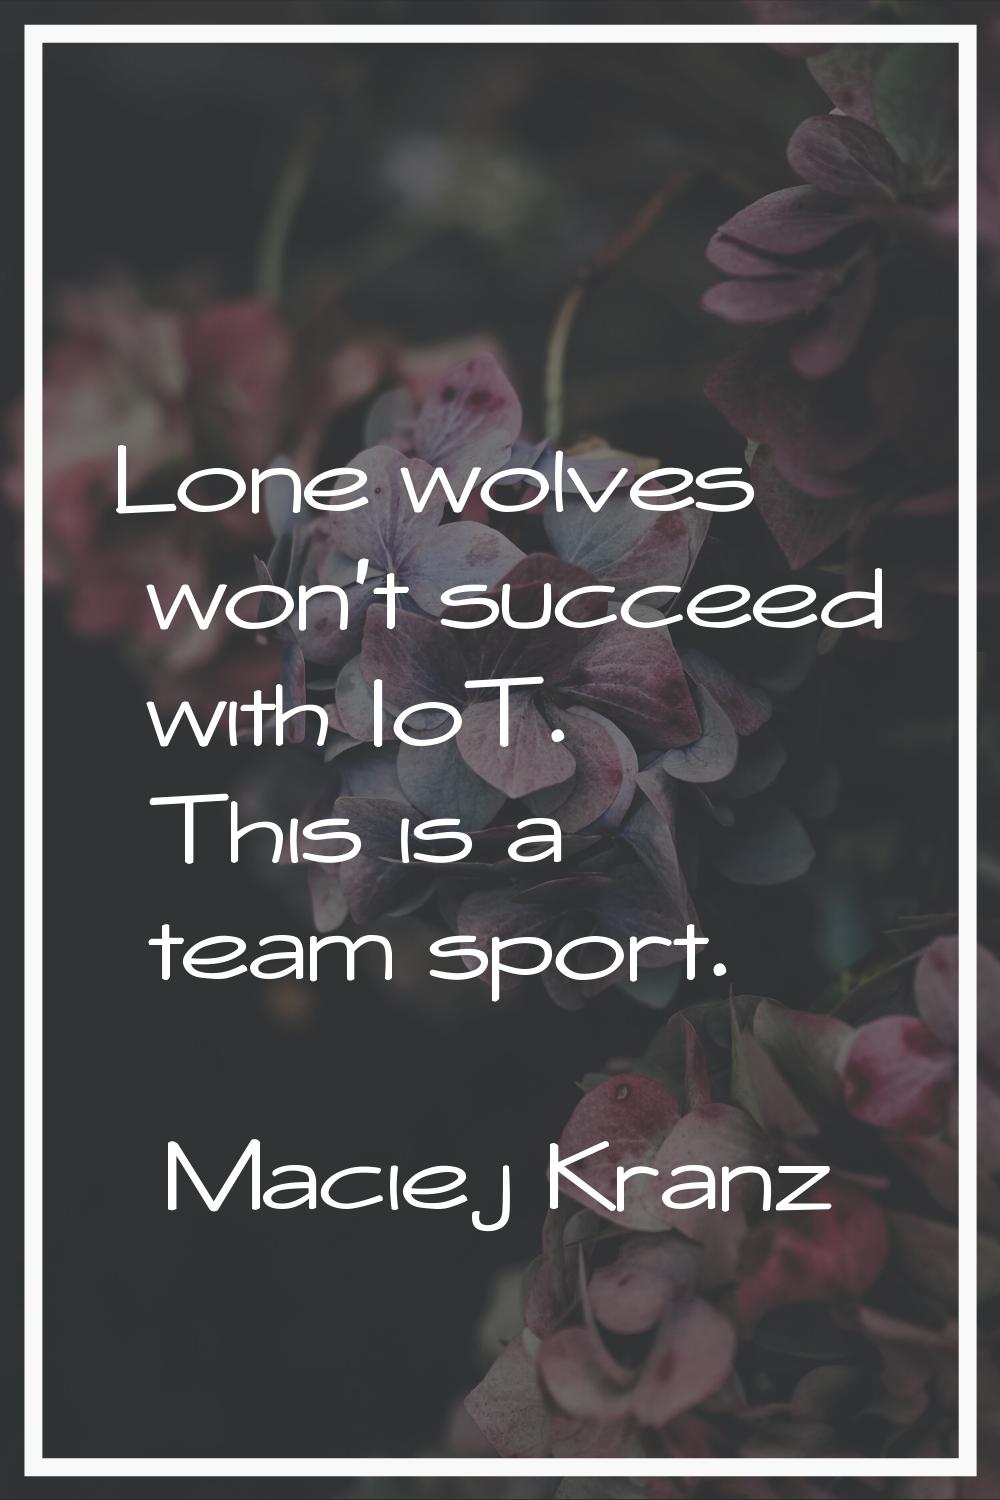 Lone wolves won't succeed with IoT. This is a team sport.